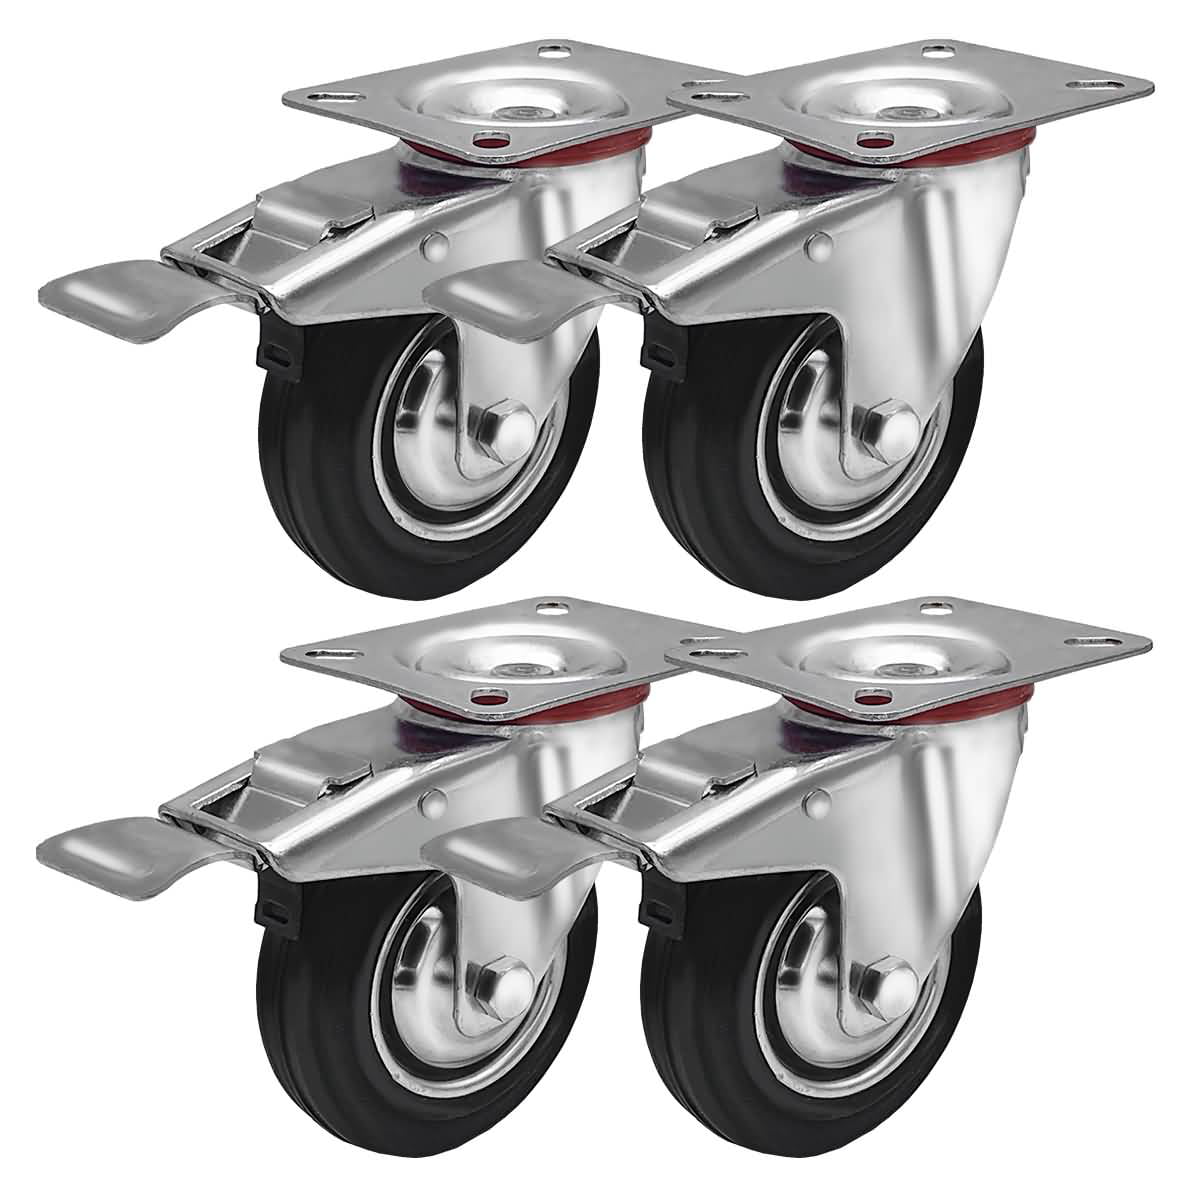 4pcs Heavy Duty Swivel Casters with Lock Brakes 5" Wheels 350 lbs For Furniture 